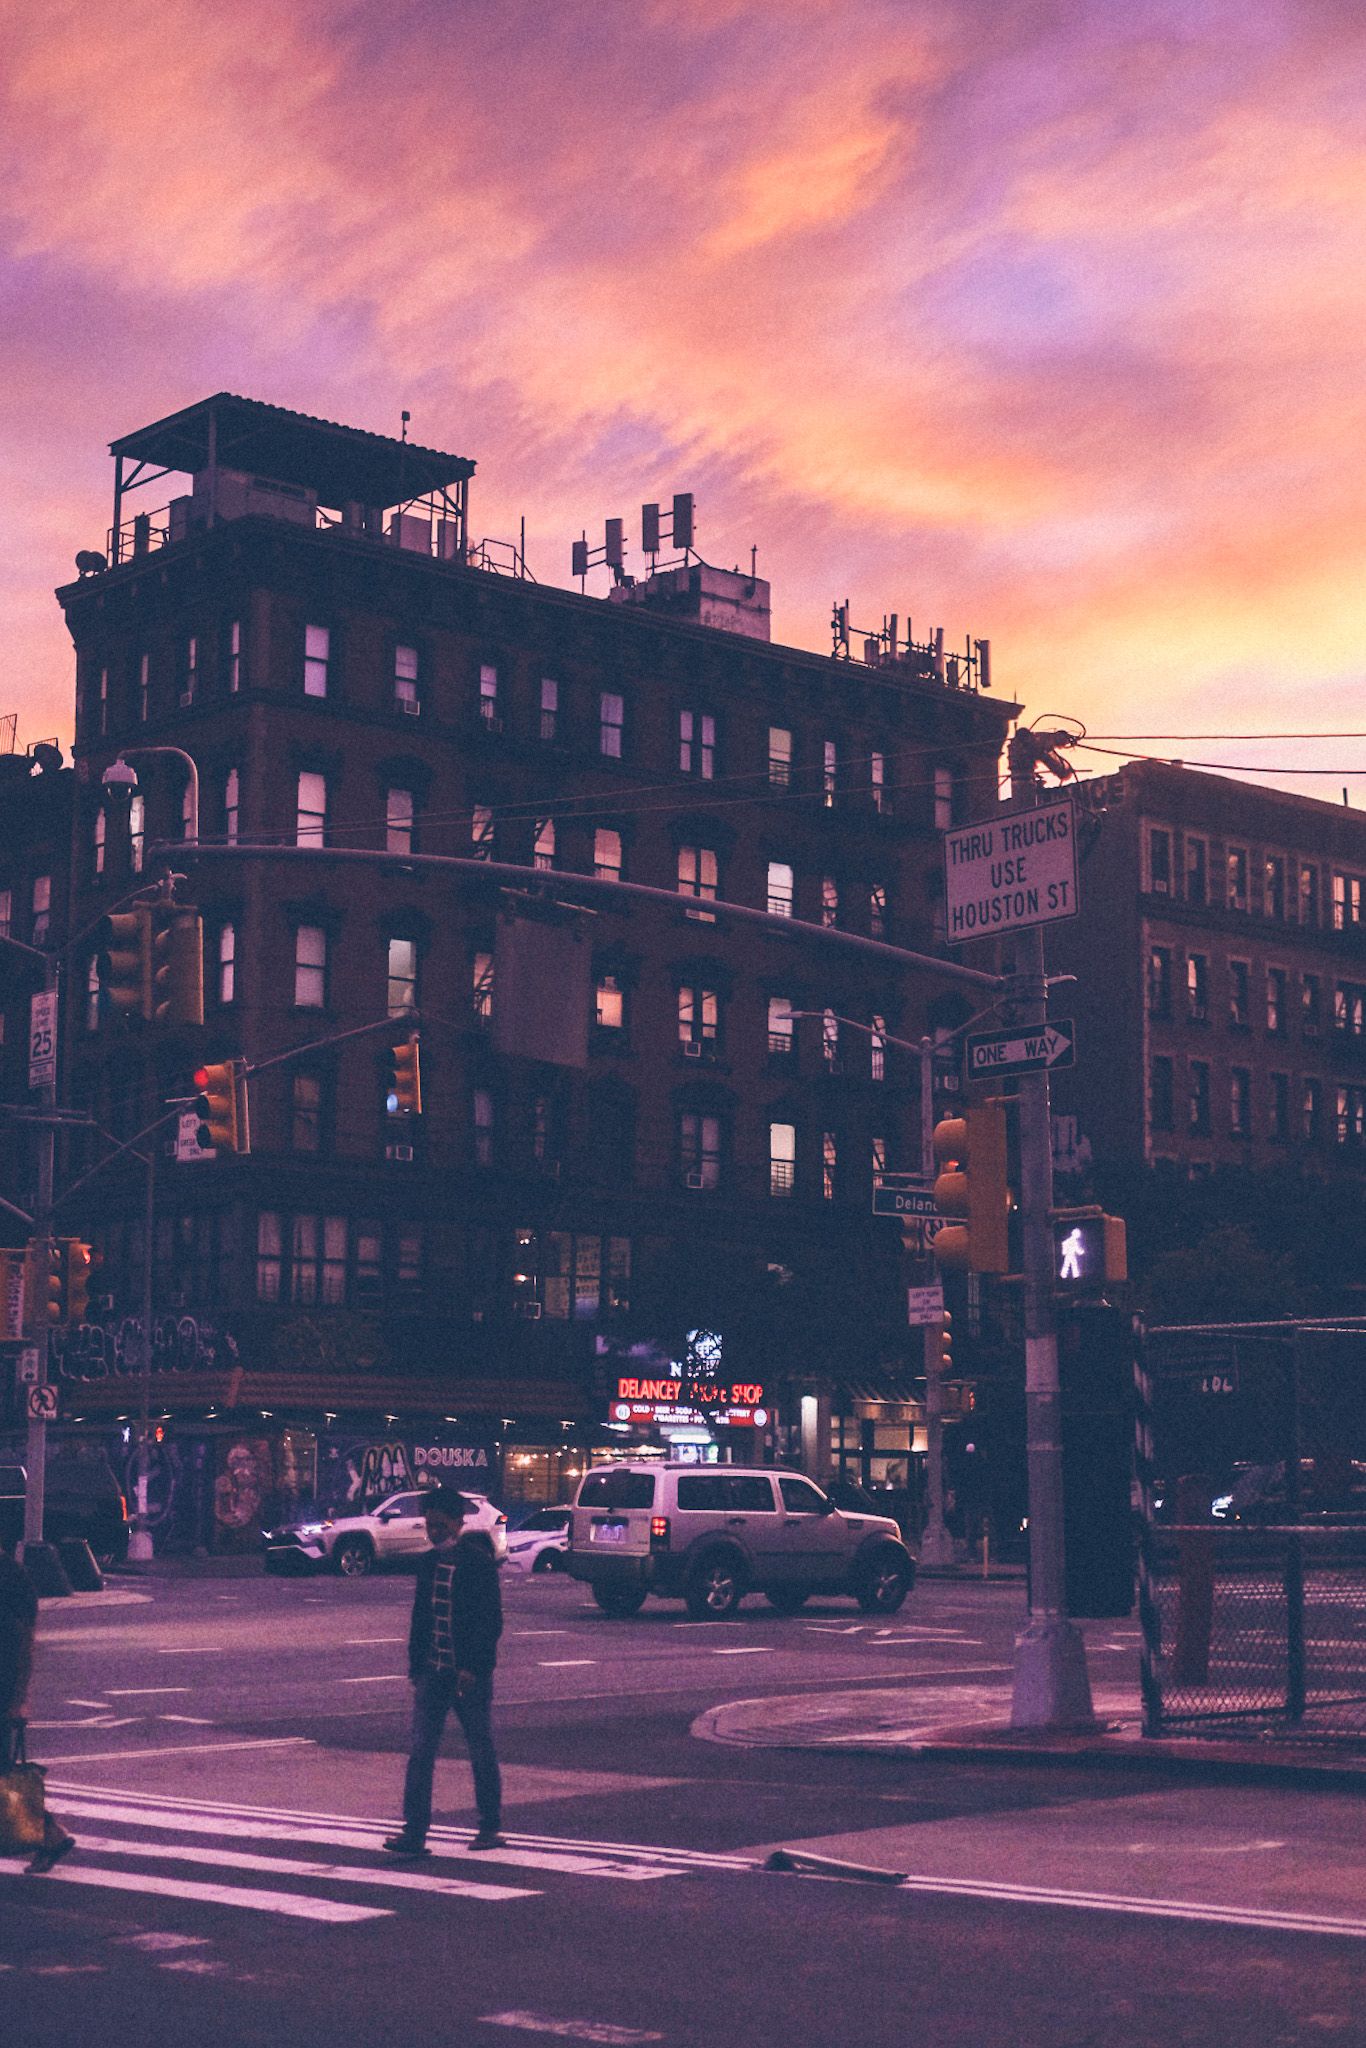 New York’s lower east side basks in the magical glow of a purple-orange sunset.